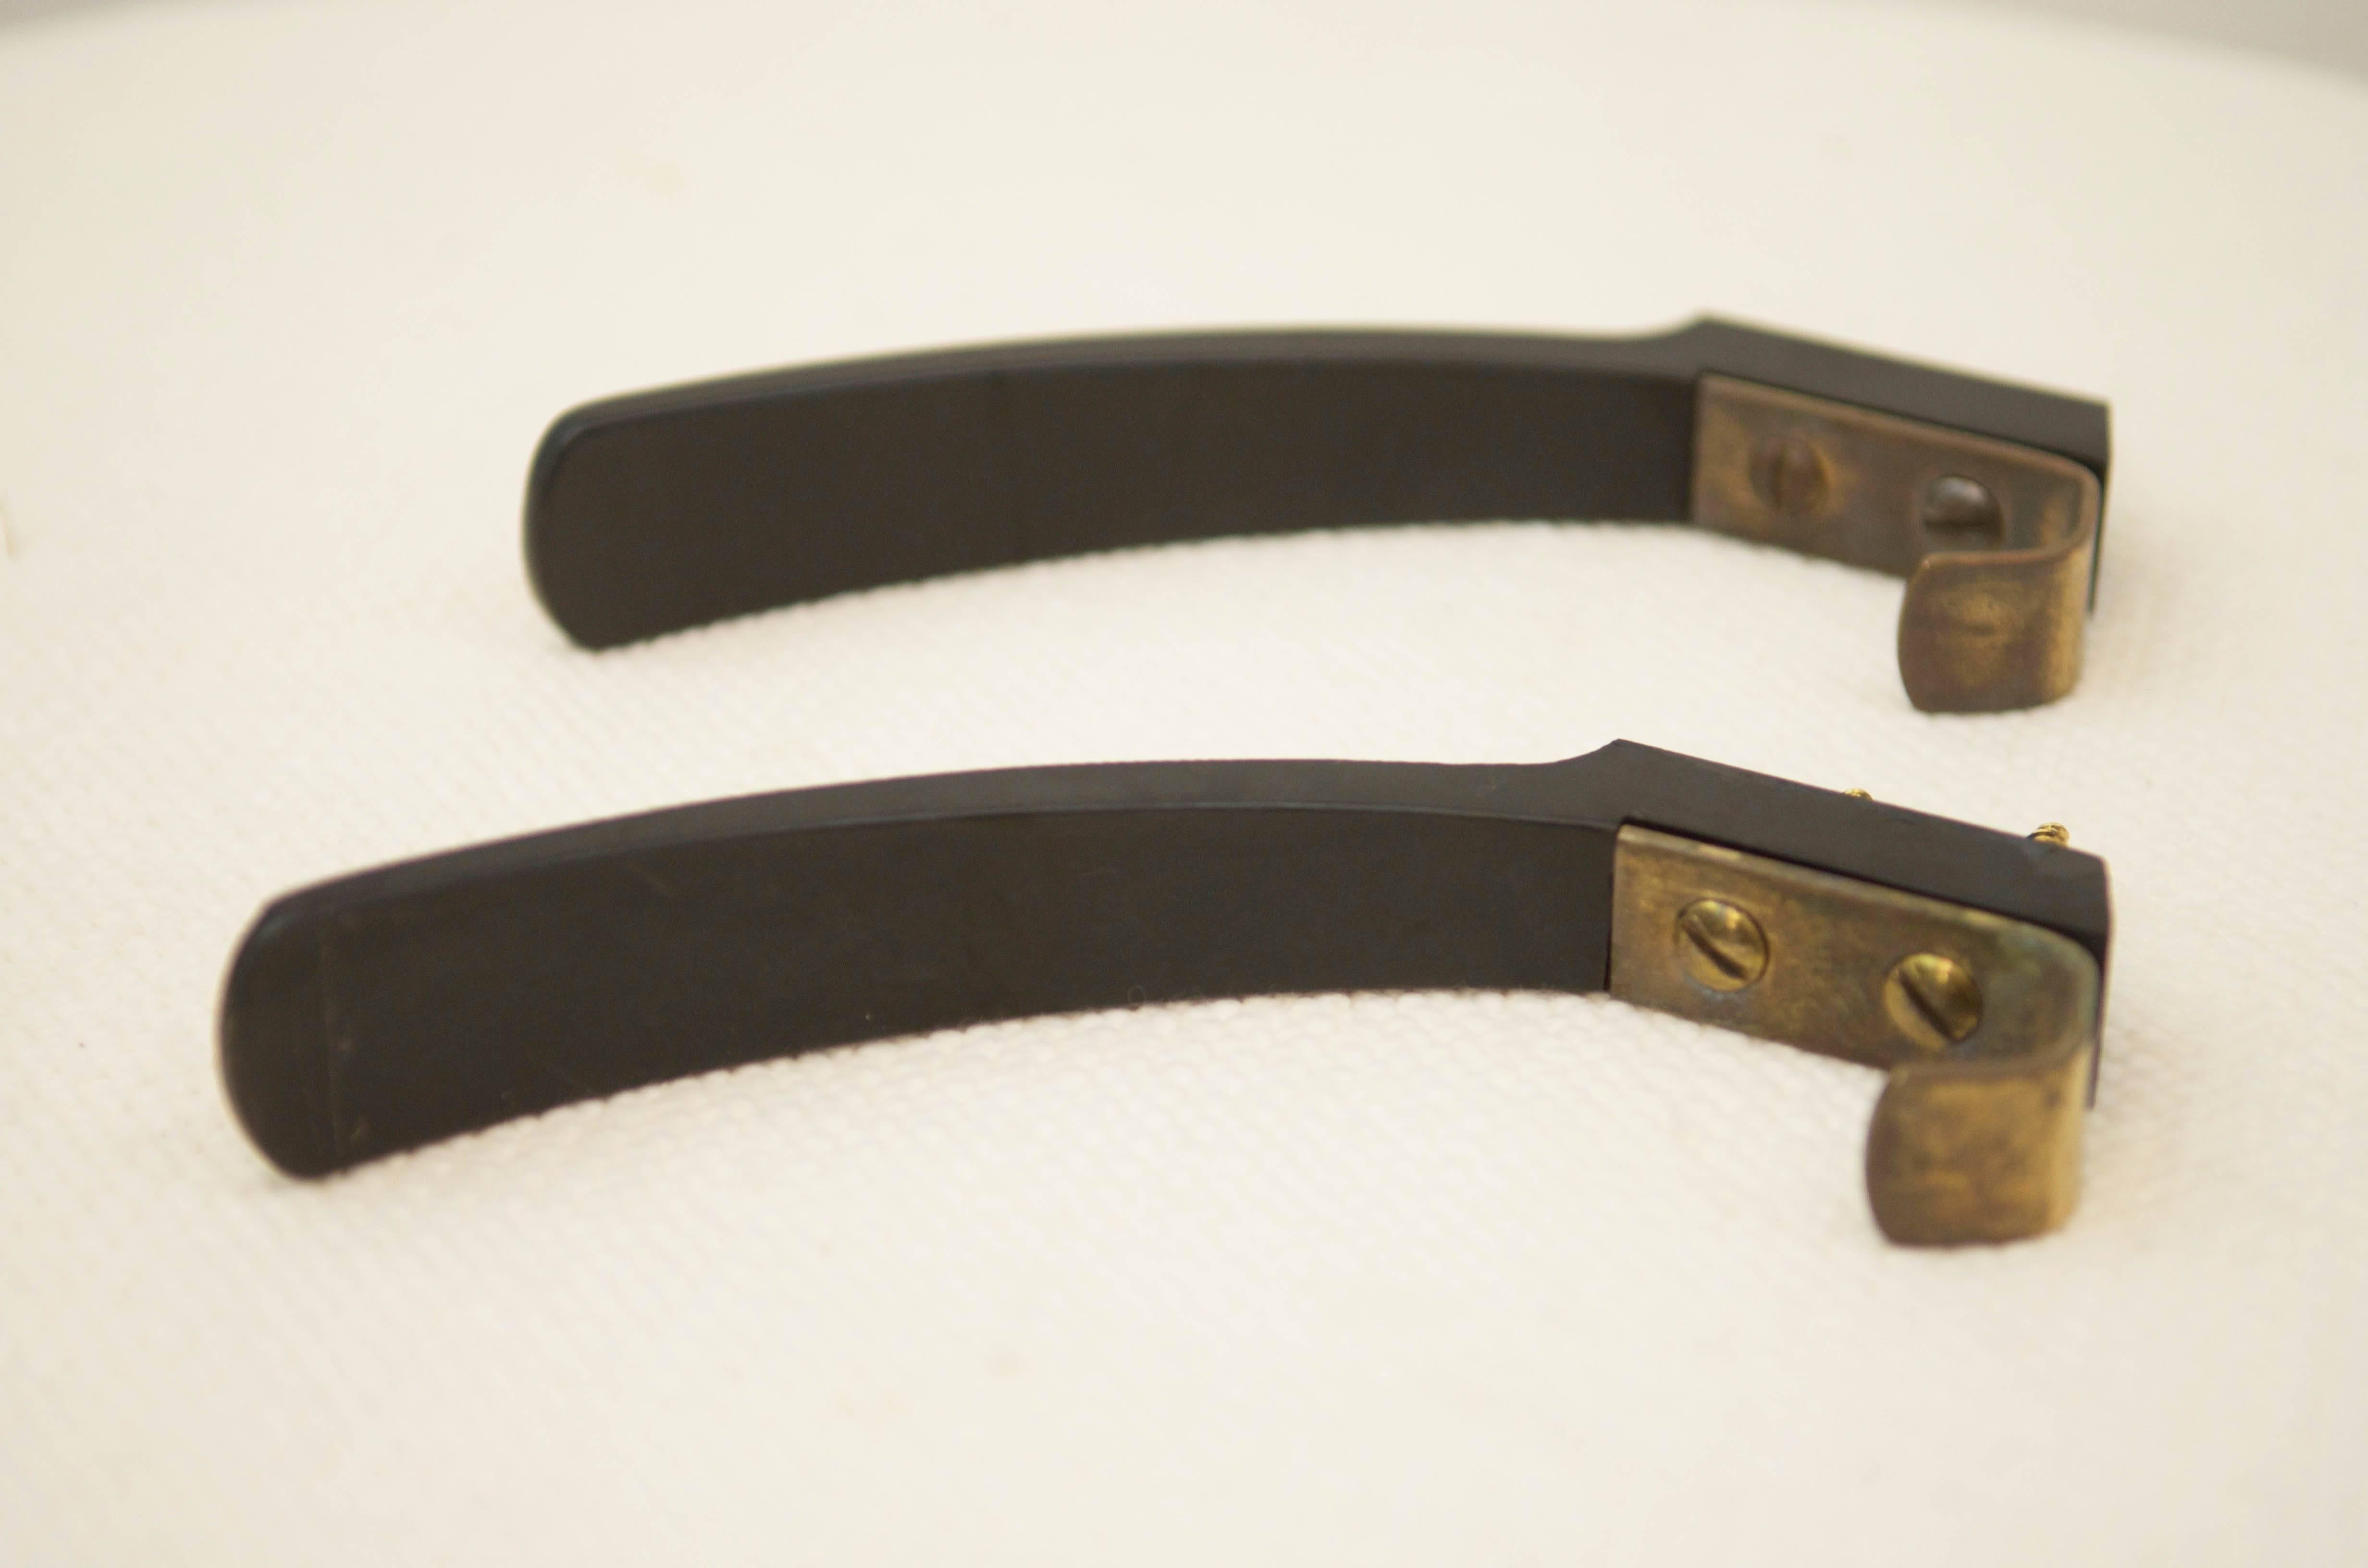 Bakelite and brass construction with two screws made in Austria in the 1960s.